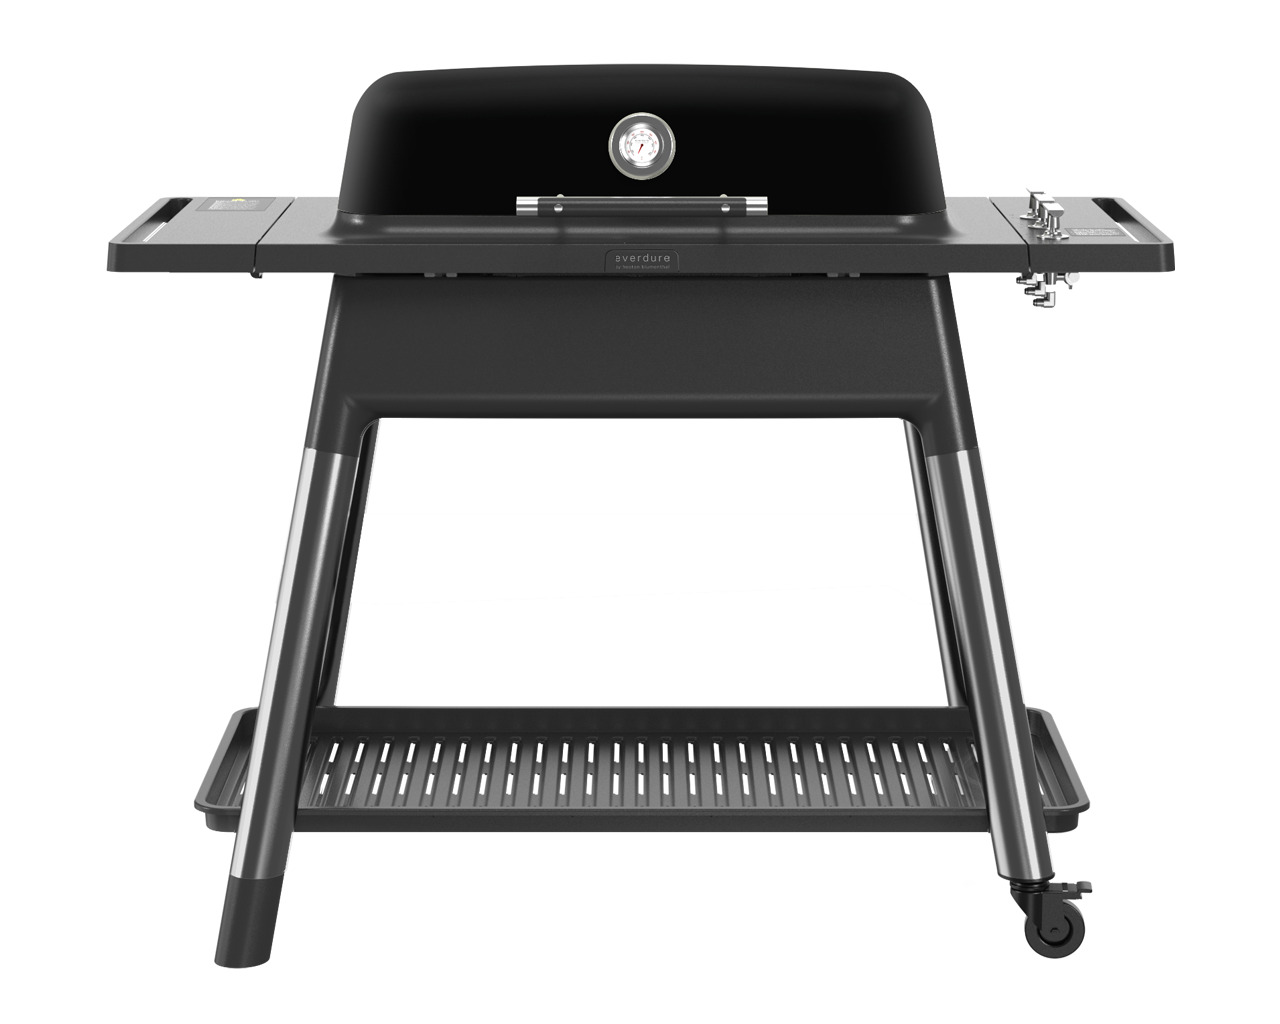 Everdure by Heston Blumenthal FURNACE 3 Burner BBQ with Stand, Black, small-swatch